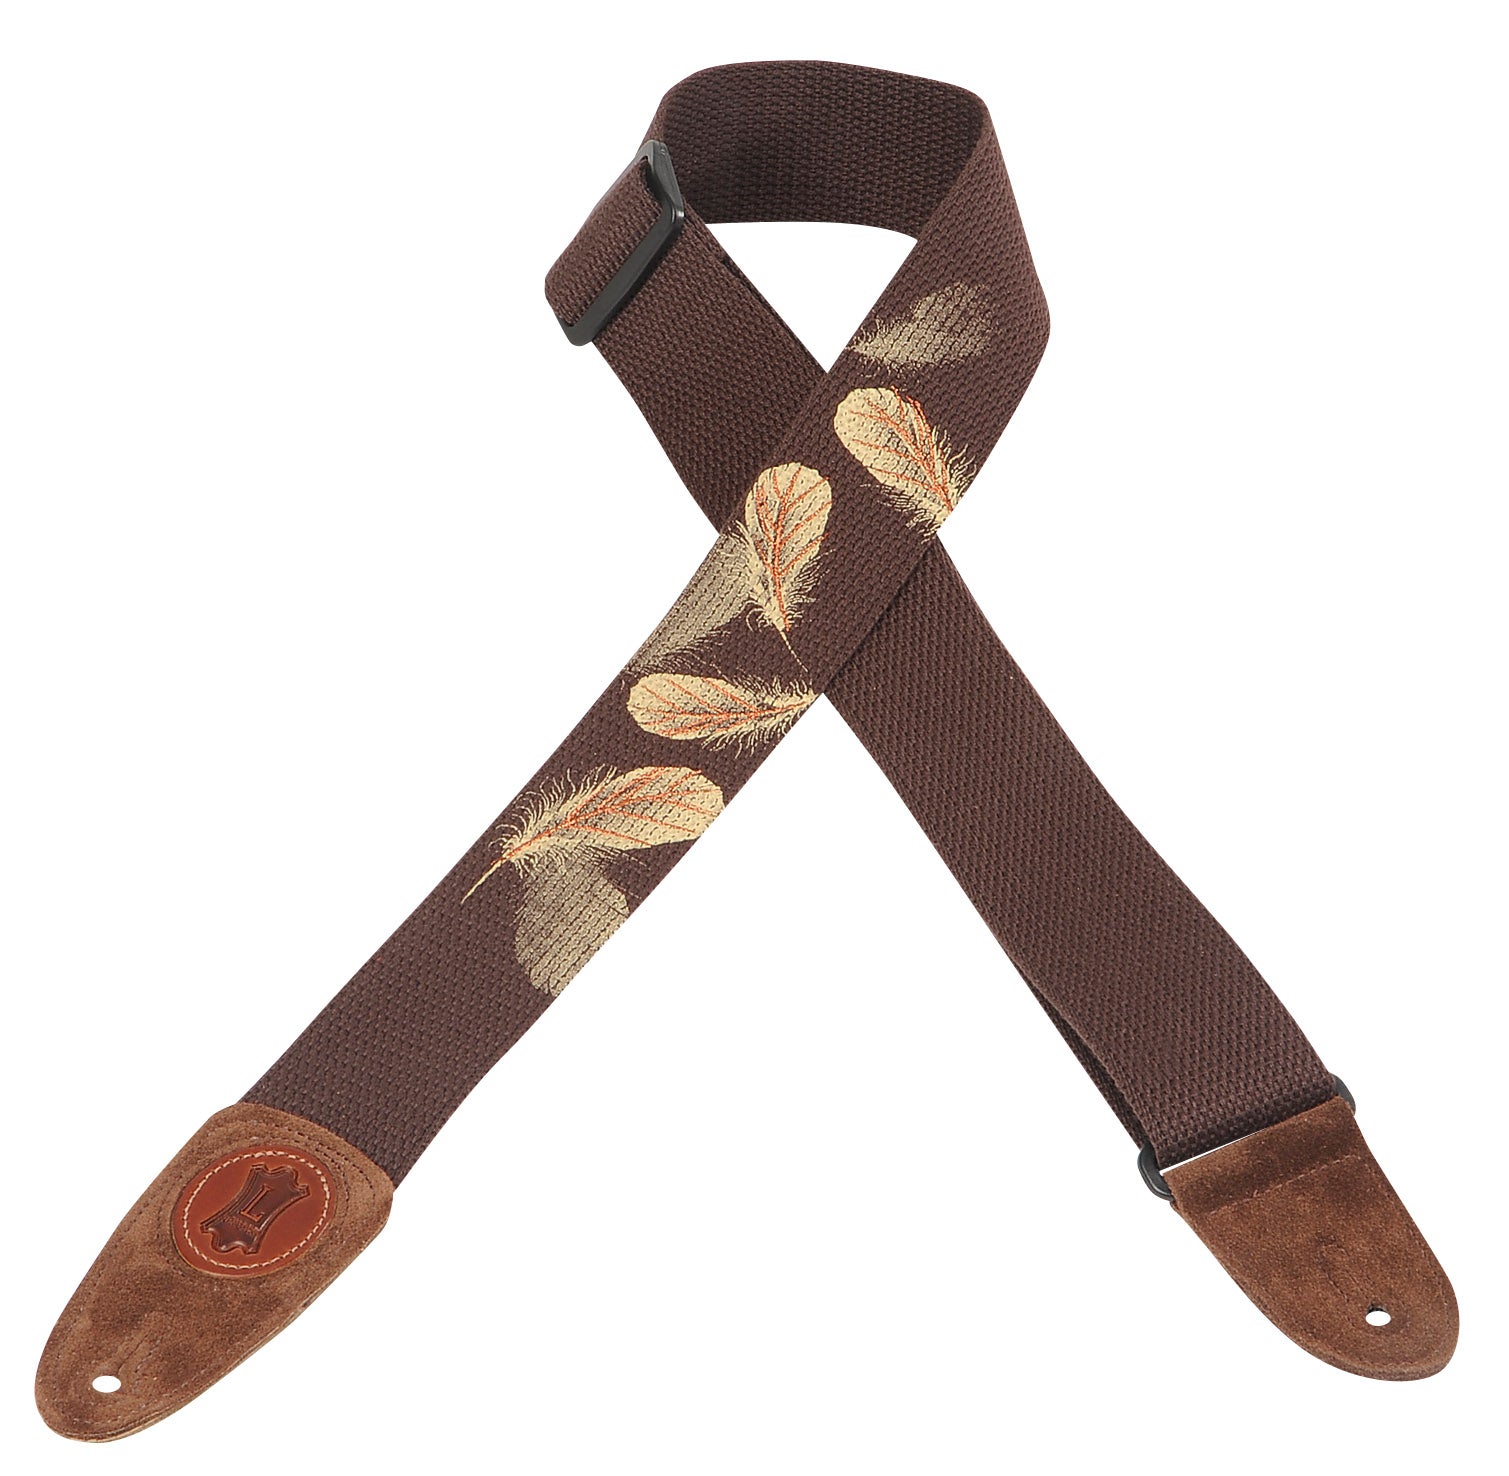 LEVY'S 2" COTTON GUITAR STRAP WITH PRINTED AND EMBROIDERED DESIGN BROWN W/ FEATHERS